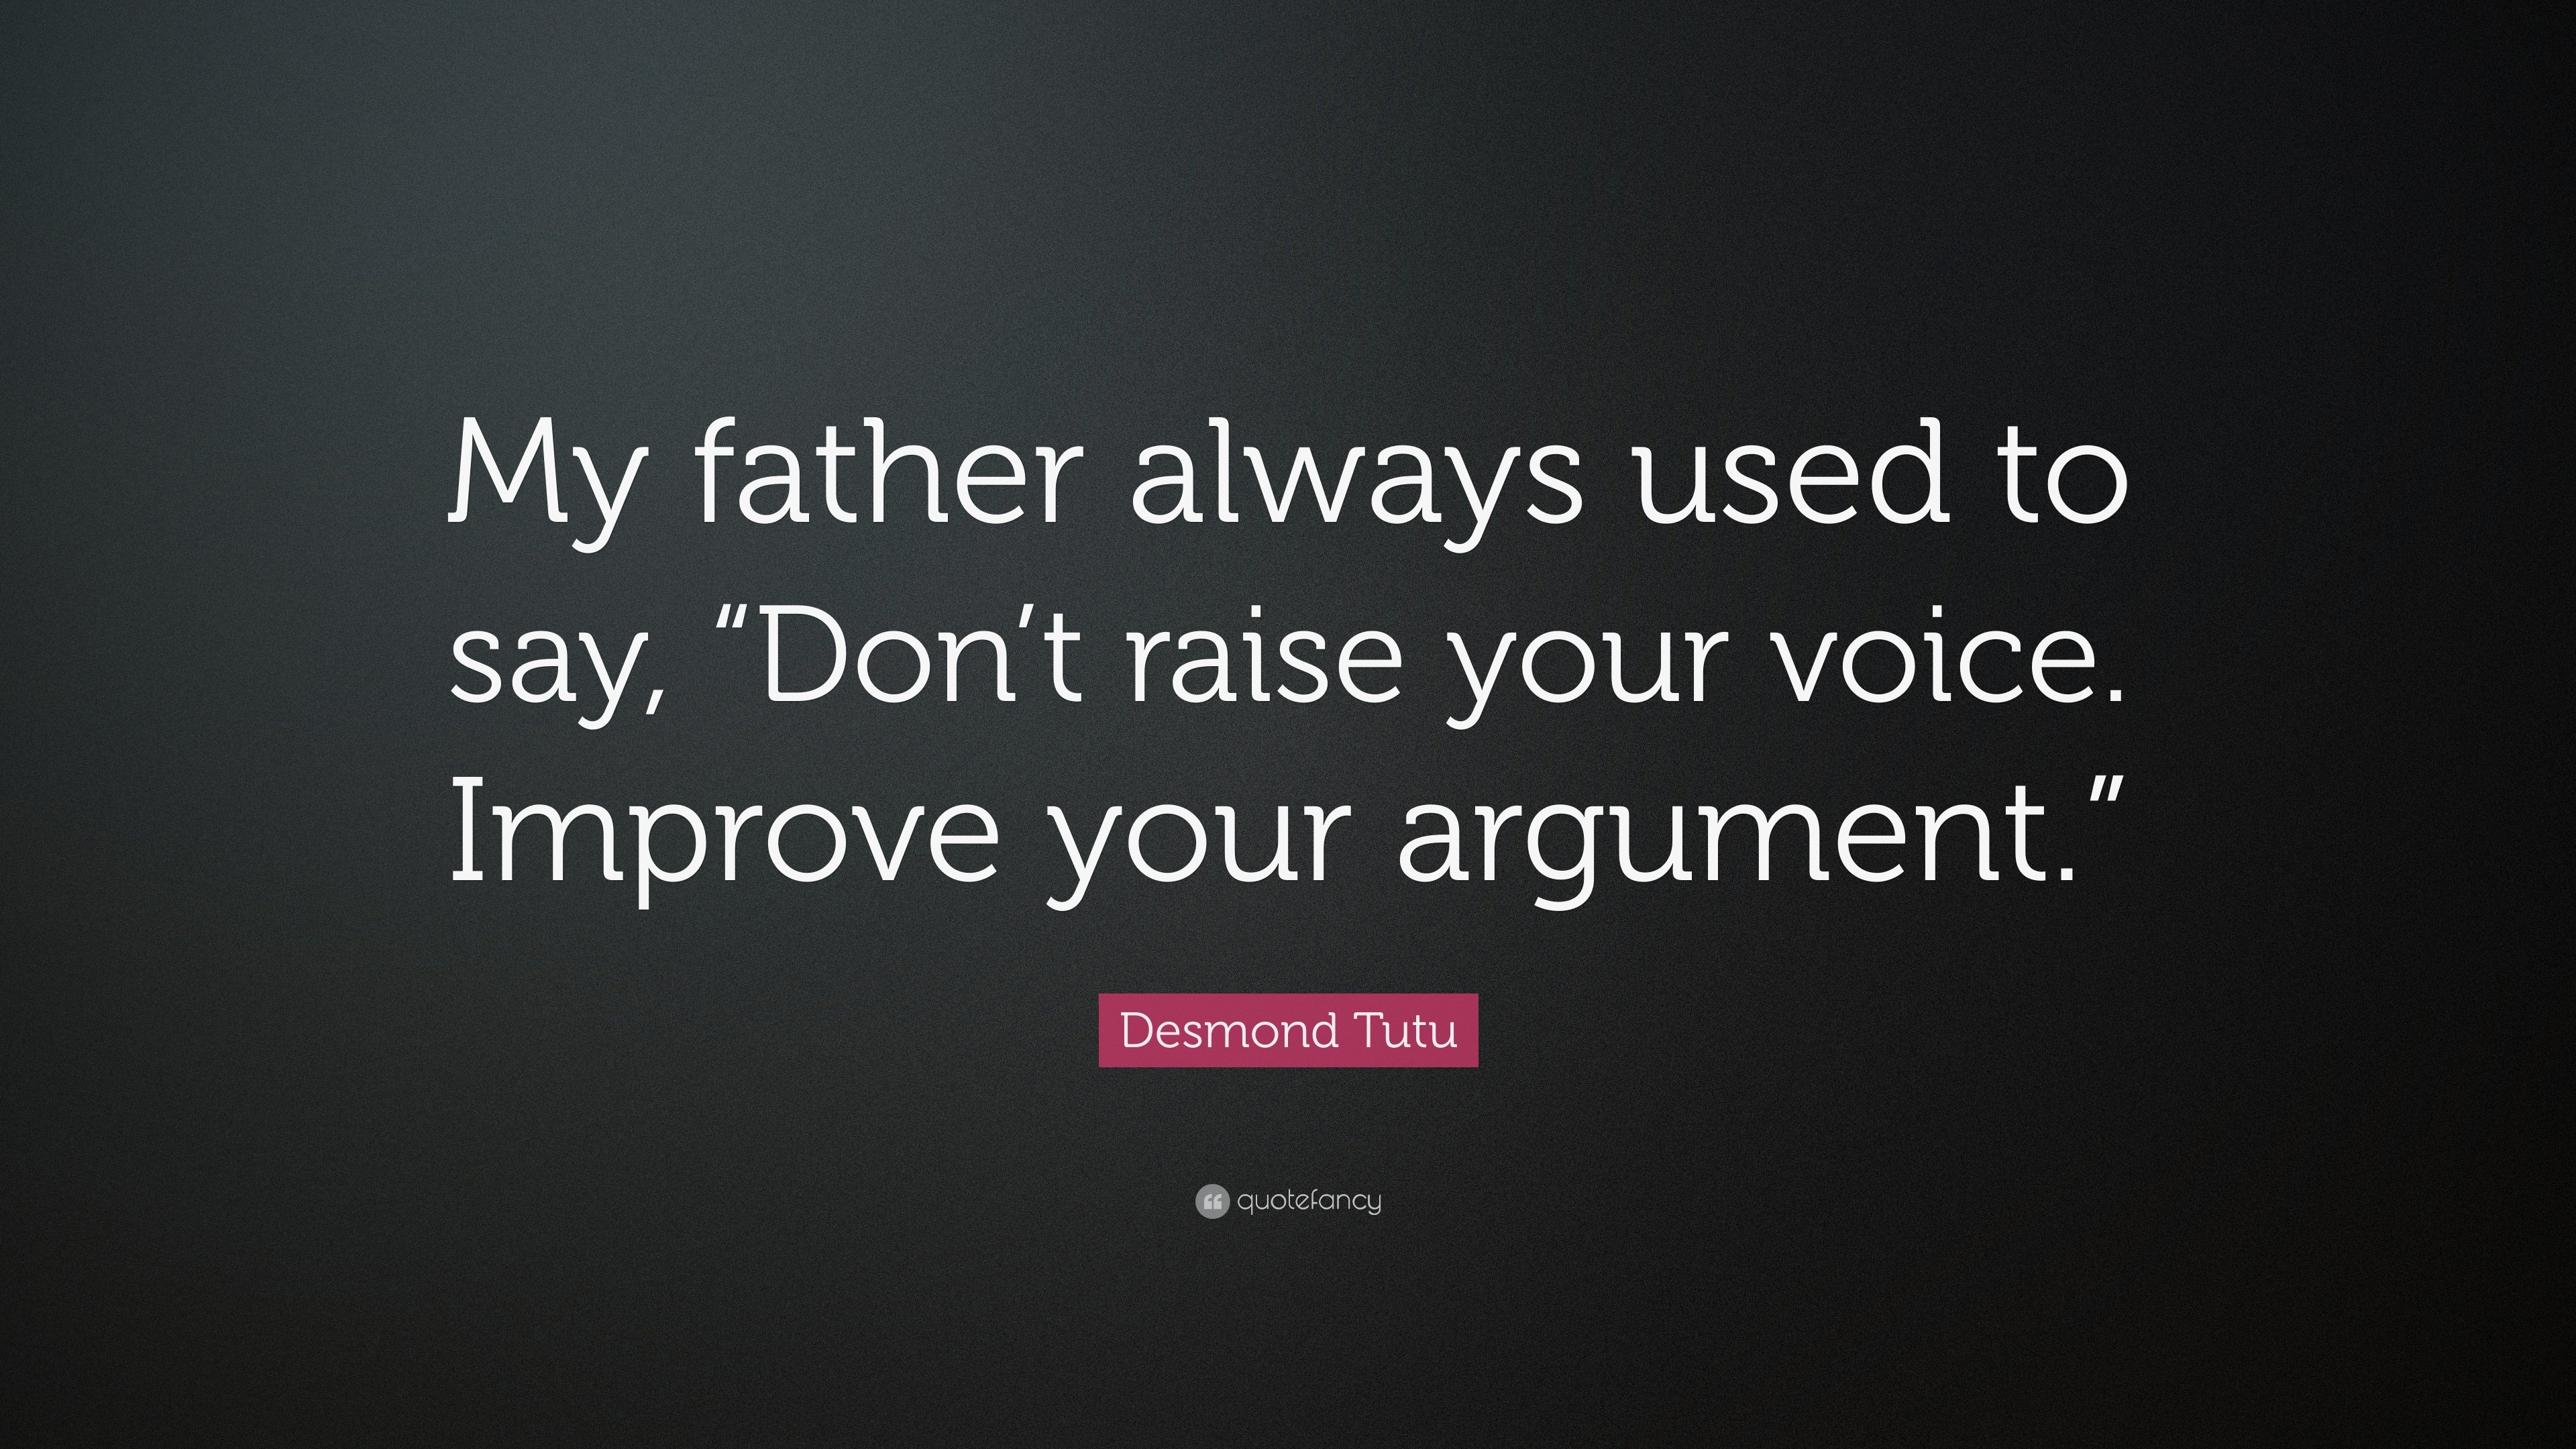 Desmond Tutu Quote: “My father always used to say, “Don’t raise your